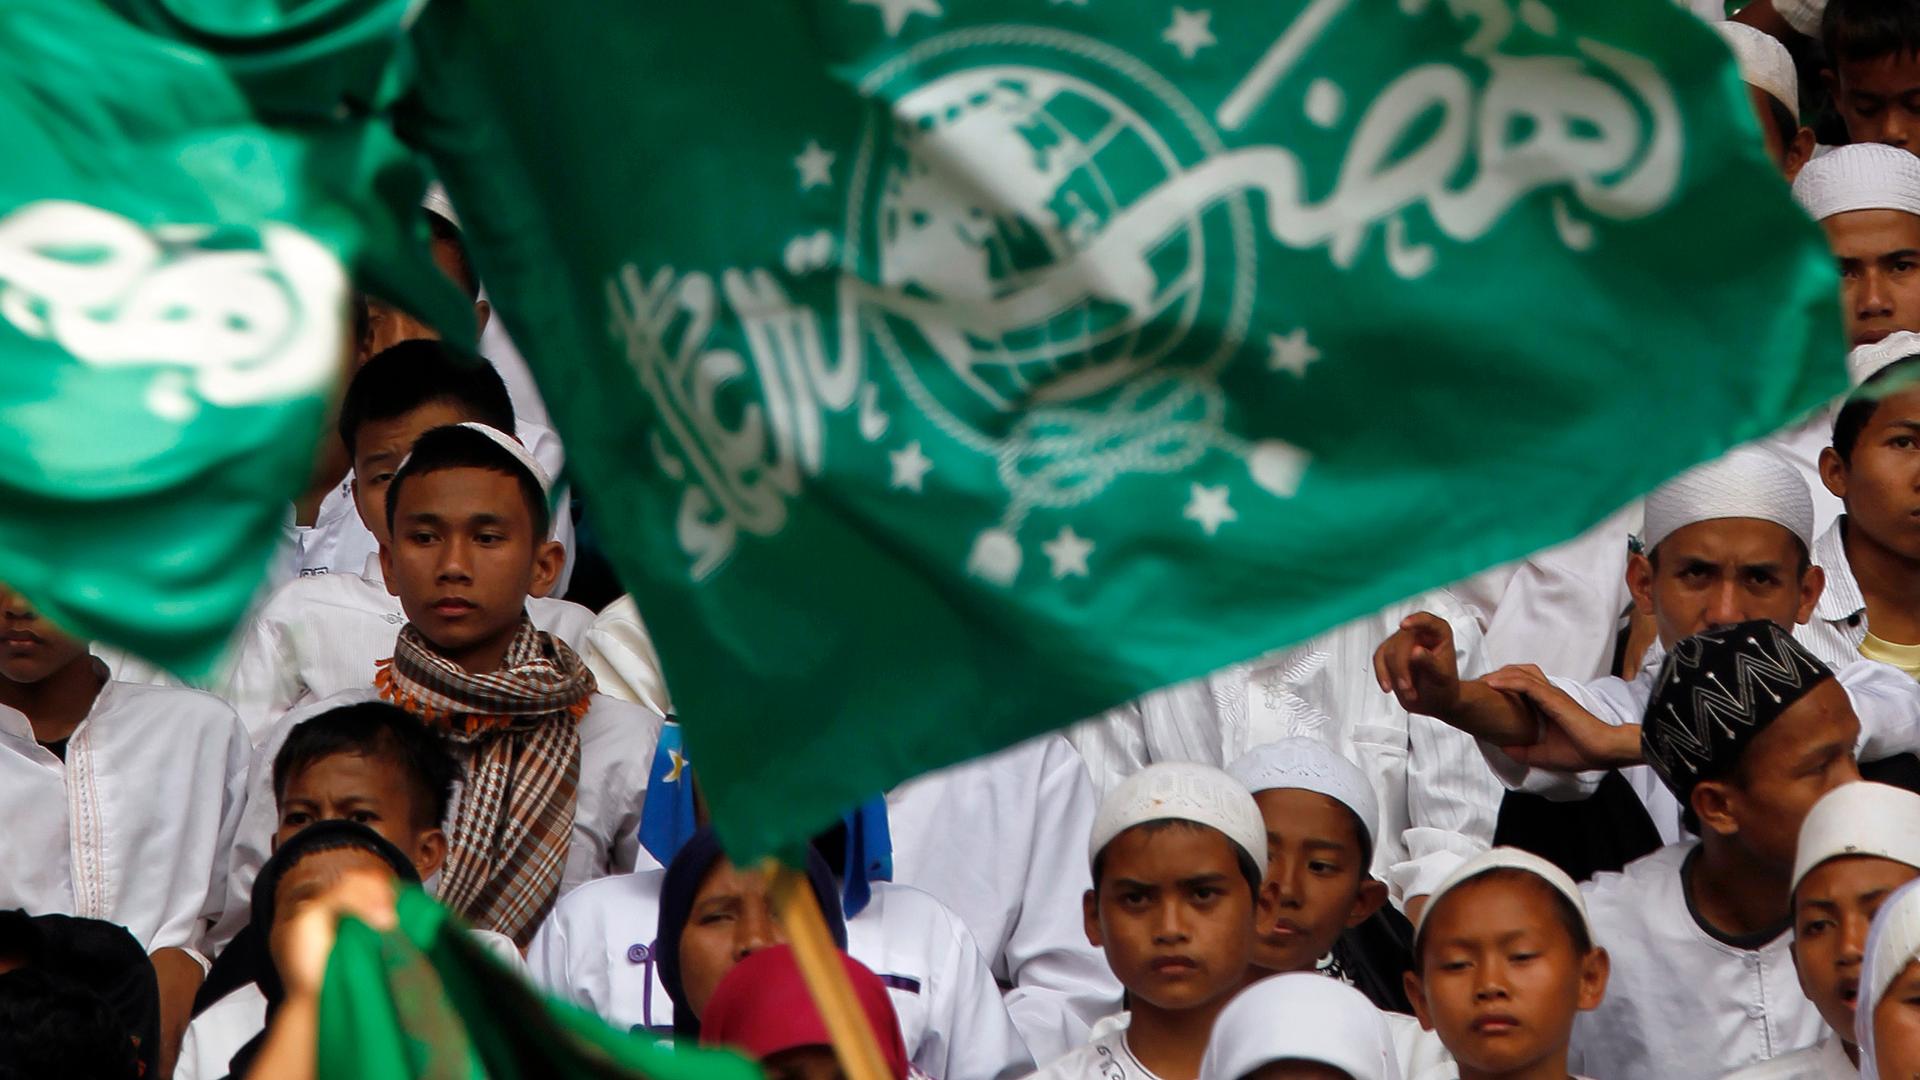 Young boys wearing white robes and caps stand behind green flag with Arabic script. 